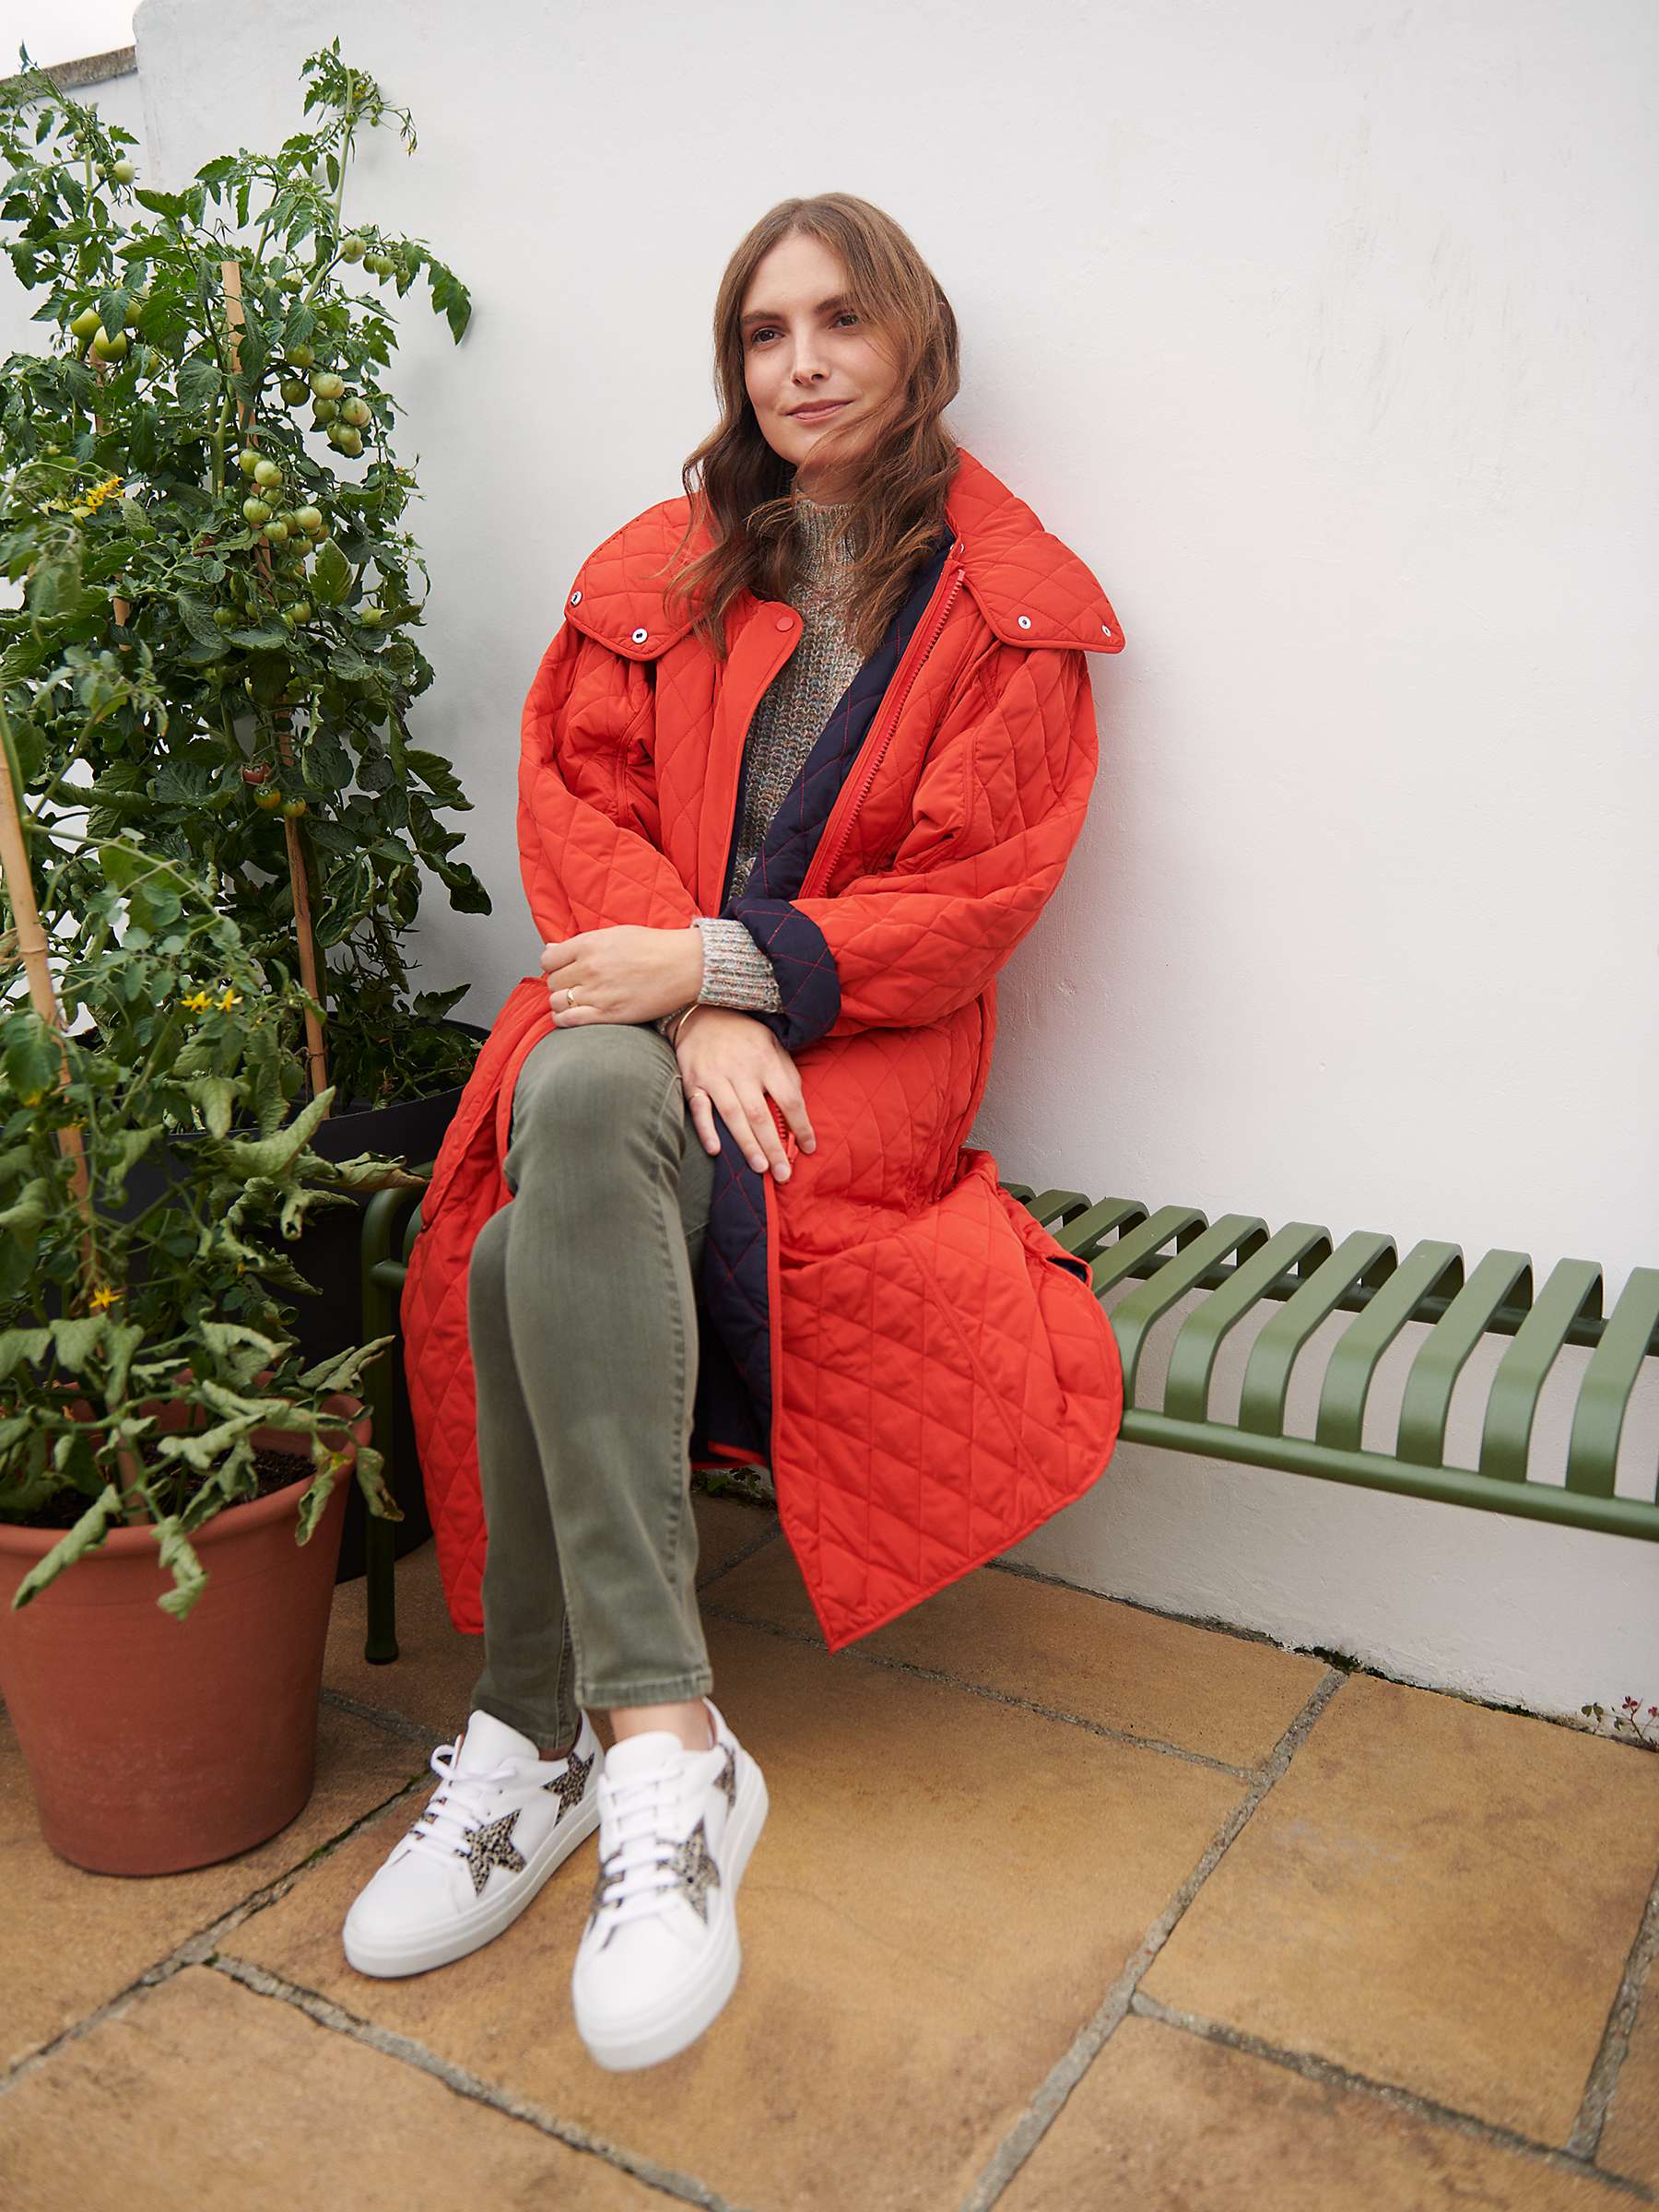 French Connection Aris Quilted Coat, Red